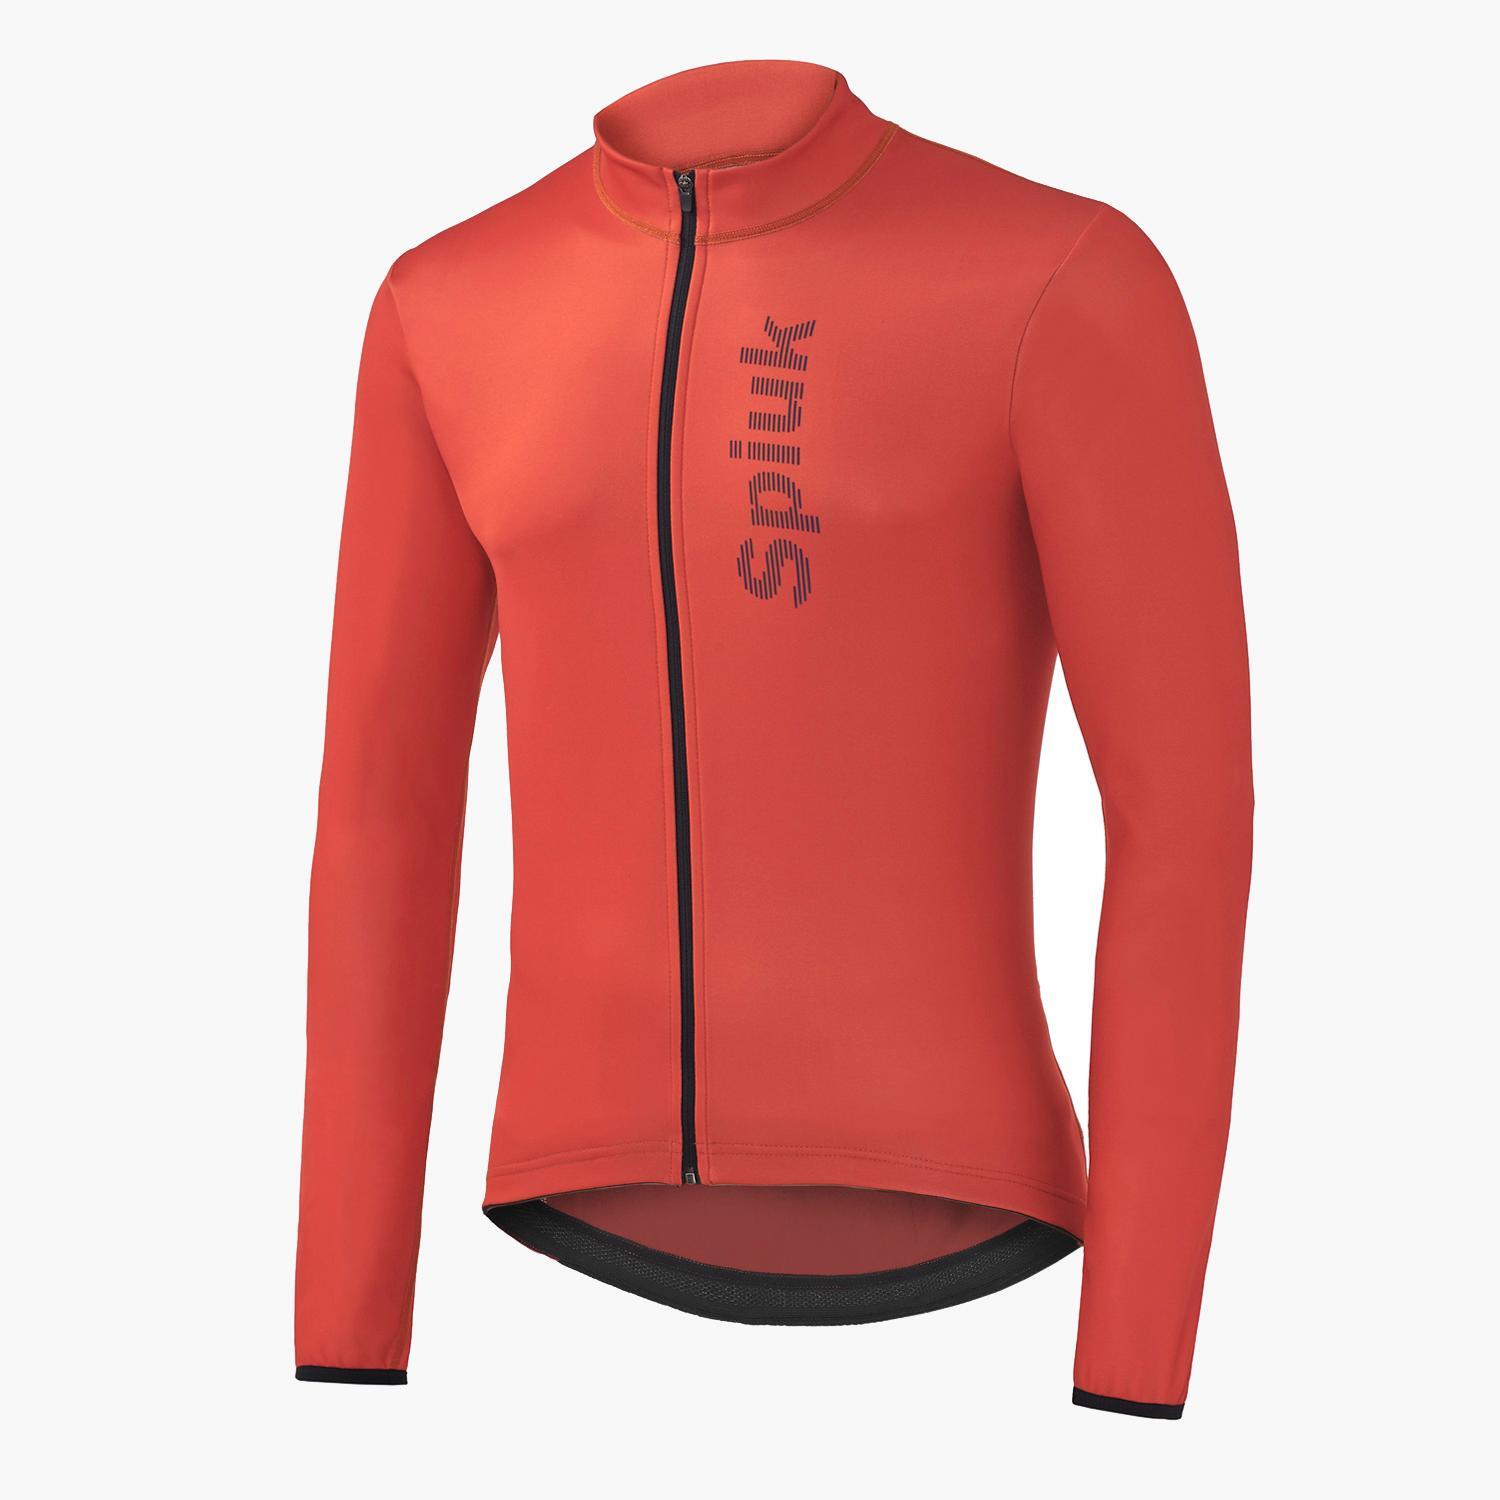 Spiuk Anatomic - Rouge - Maillot Cyclisme Homme sports taille M